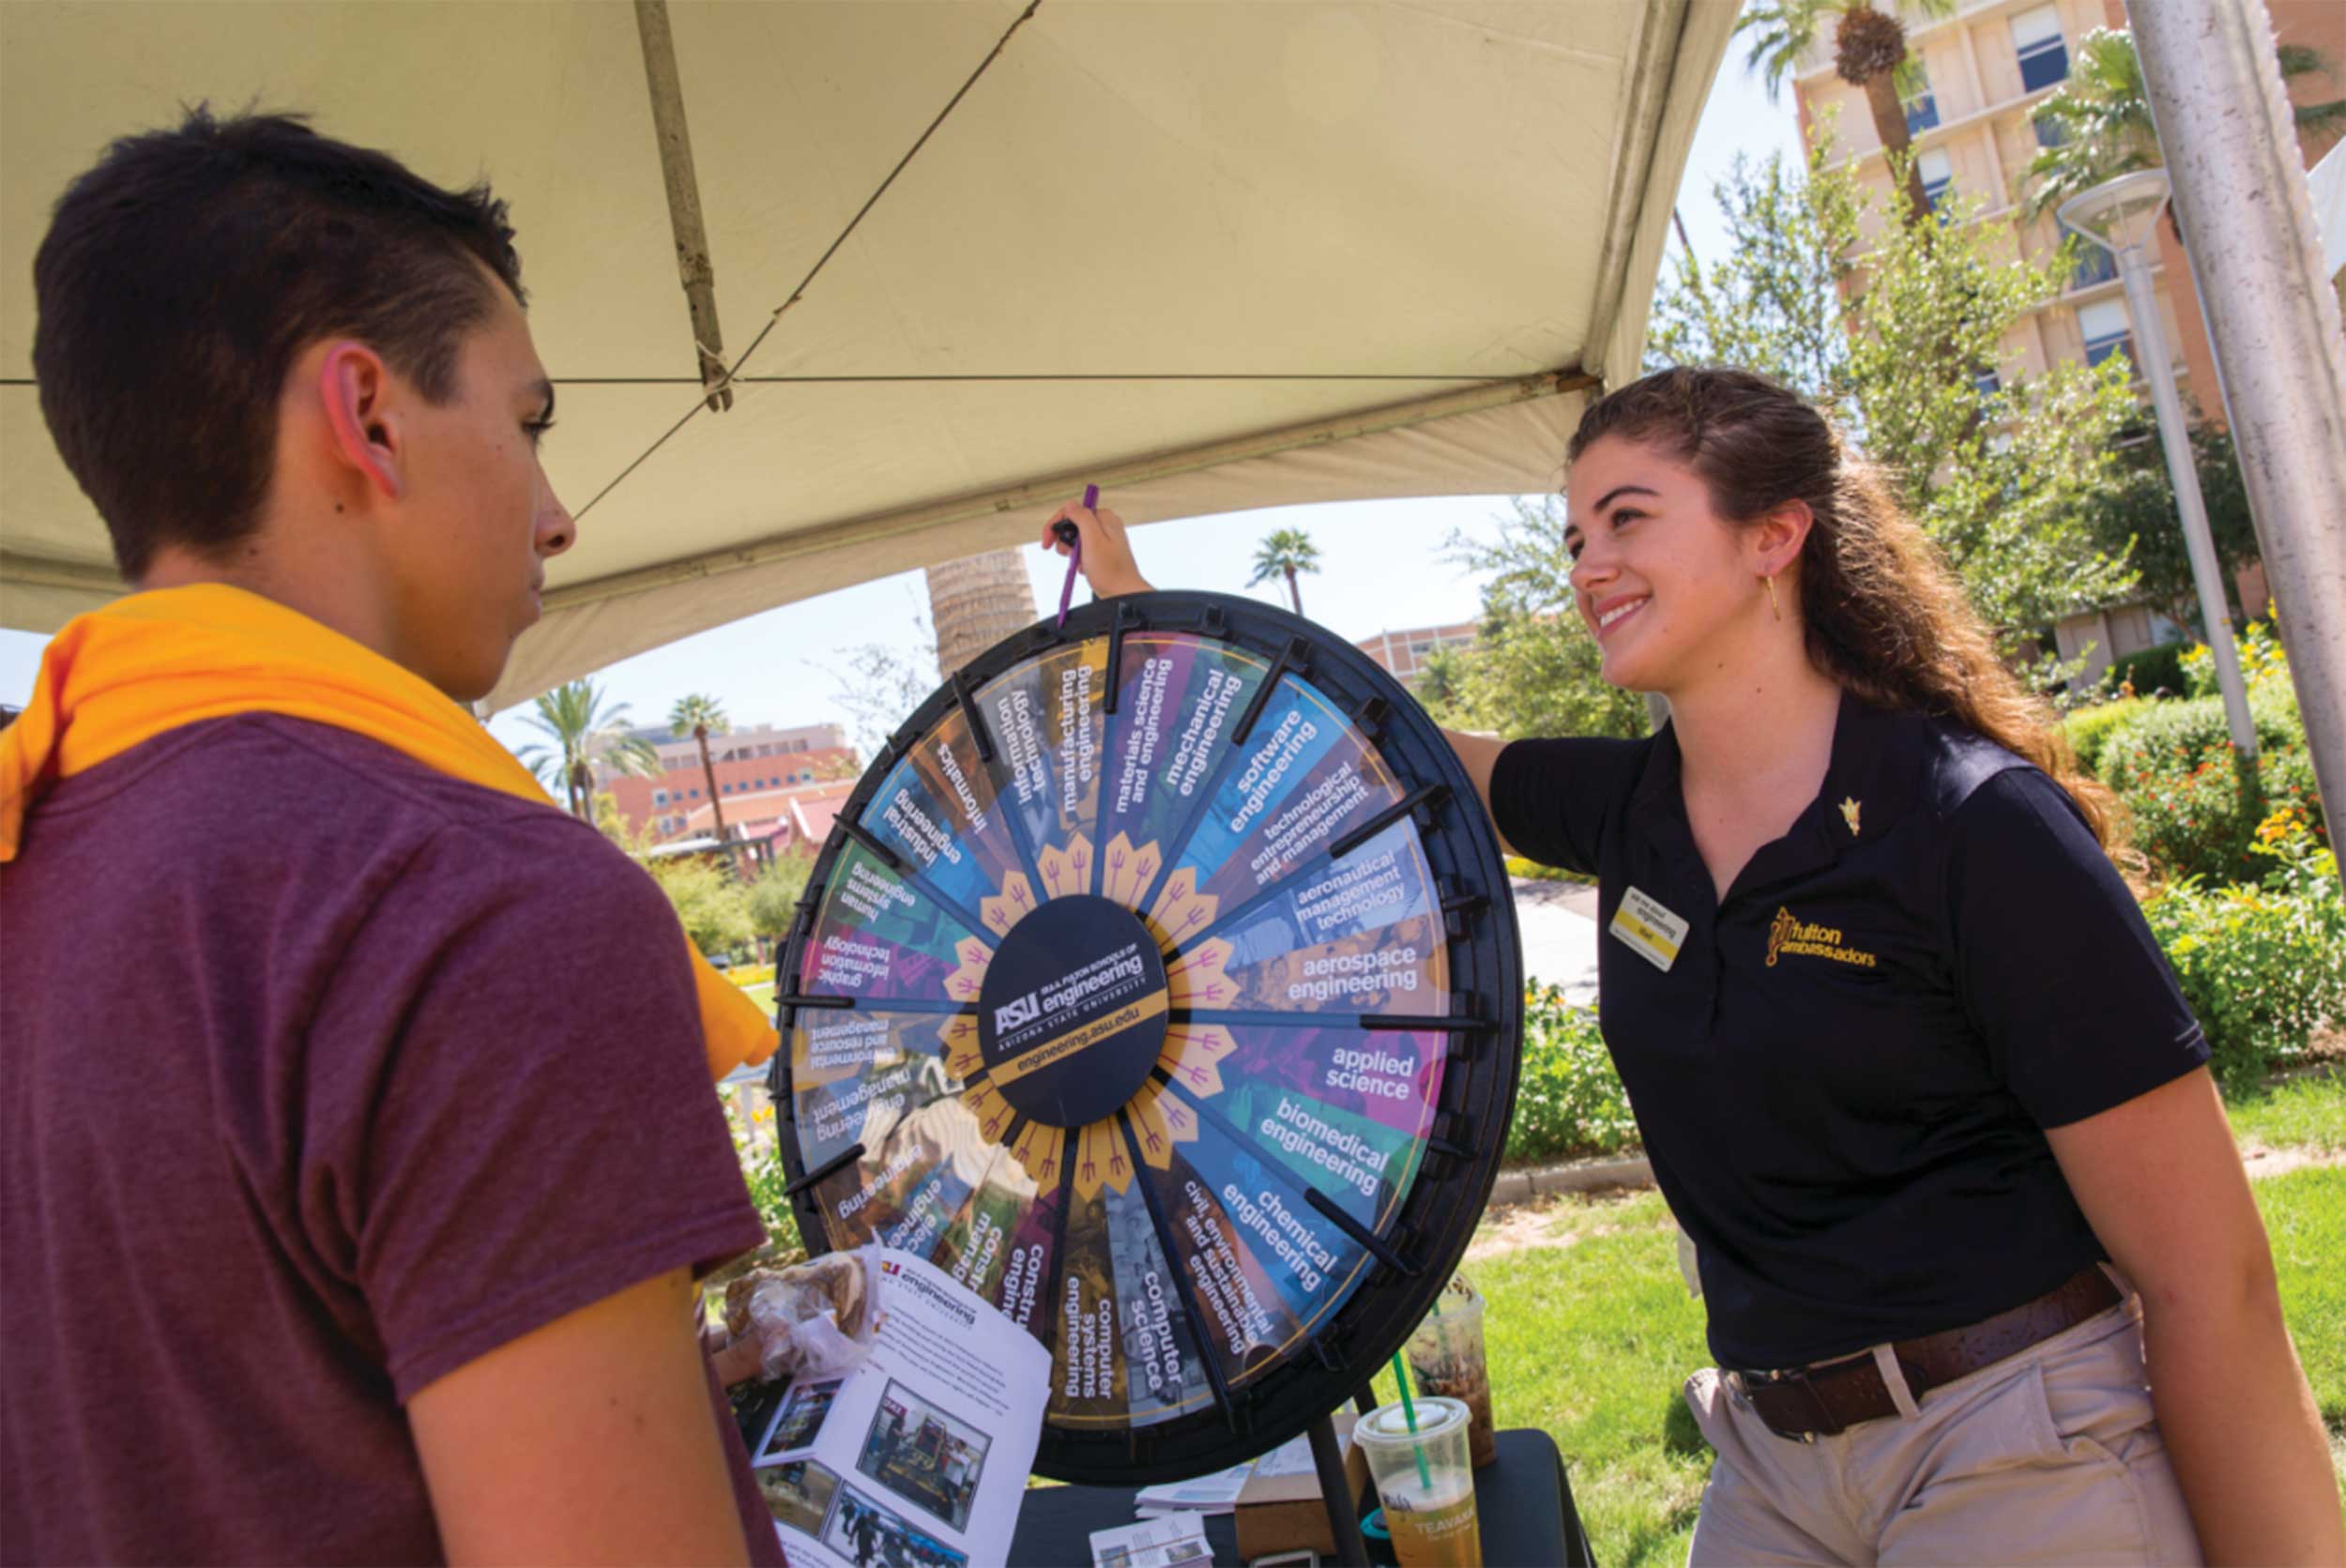 A Fulton Ambassador (right) shows the wheel of degrees to a student at the Fulton Schools Student Resource Fair